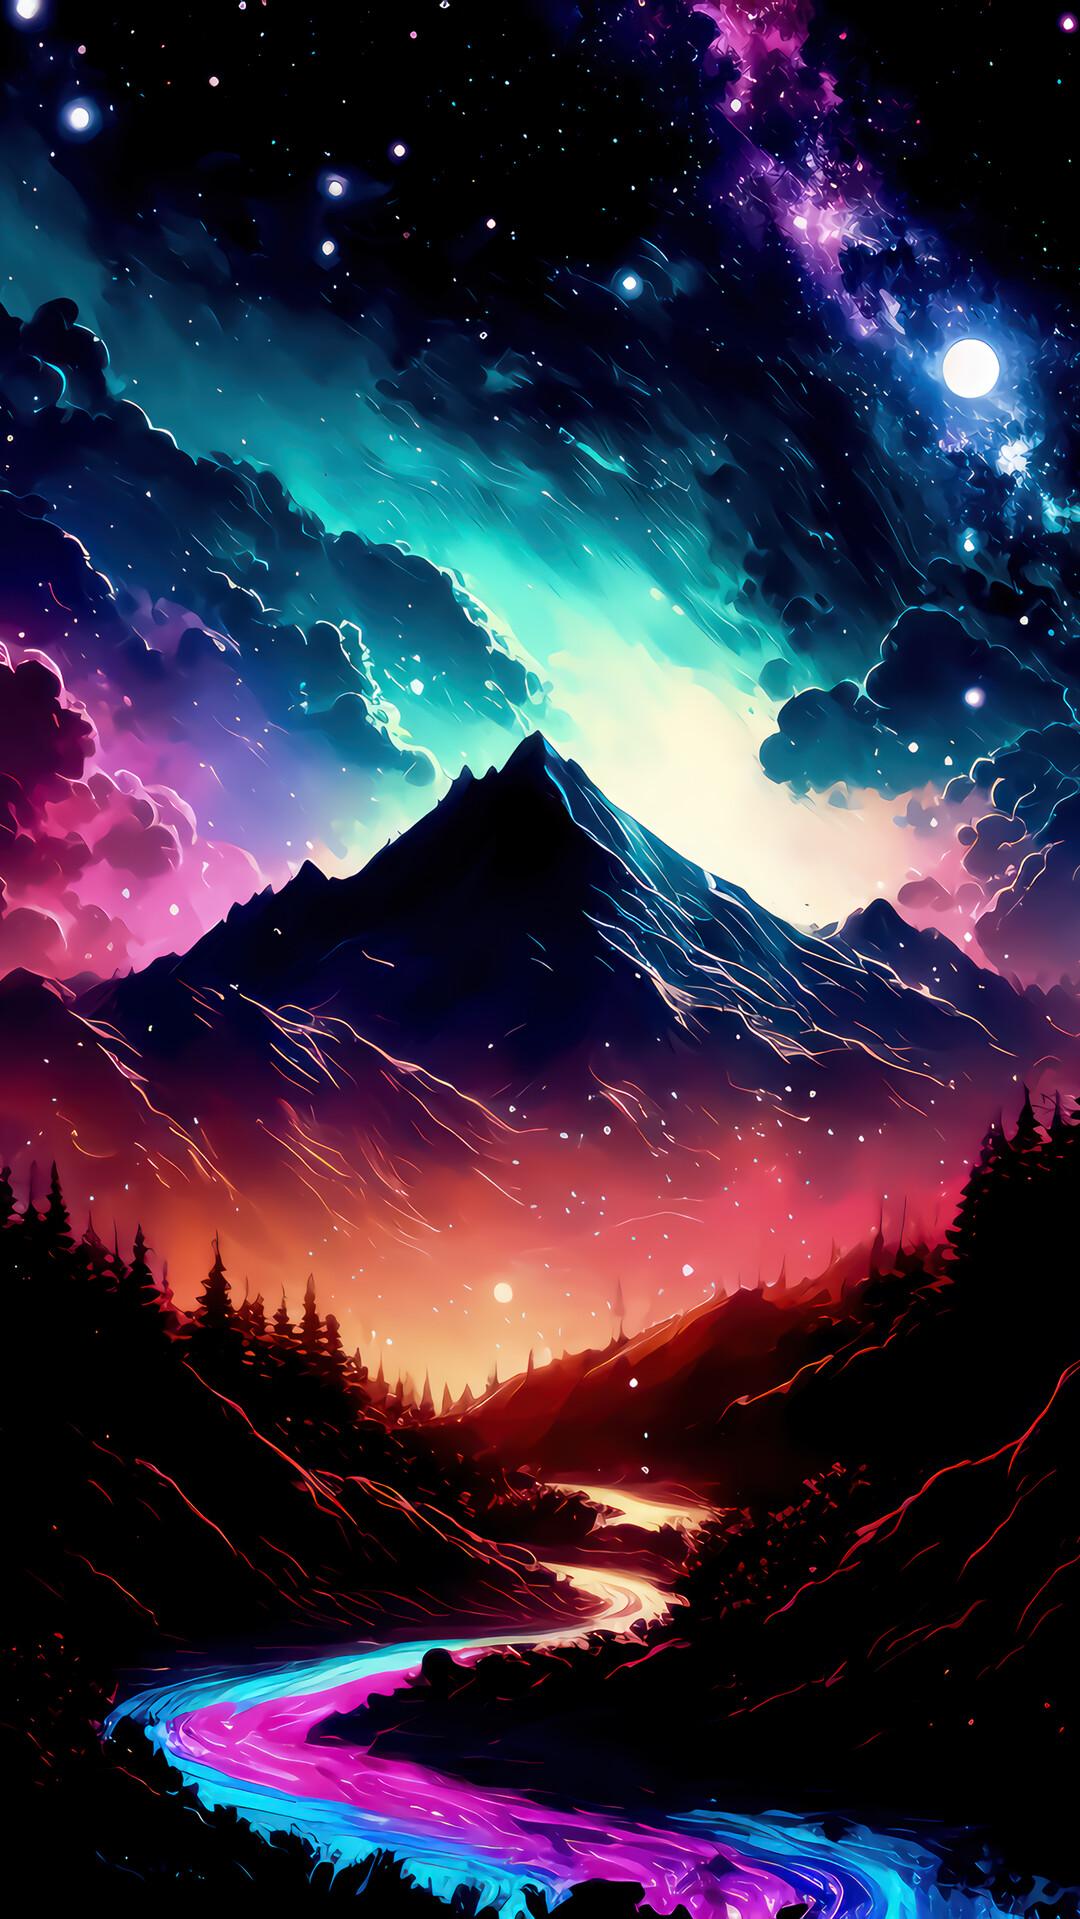 Night Sky Colorful Beautiful Clouds Mountain Valley Art Wallpaper